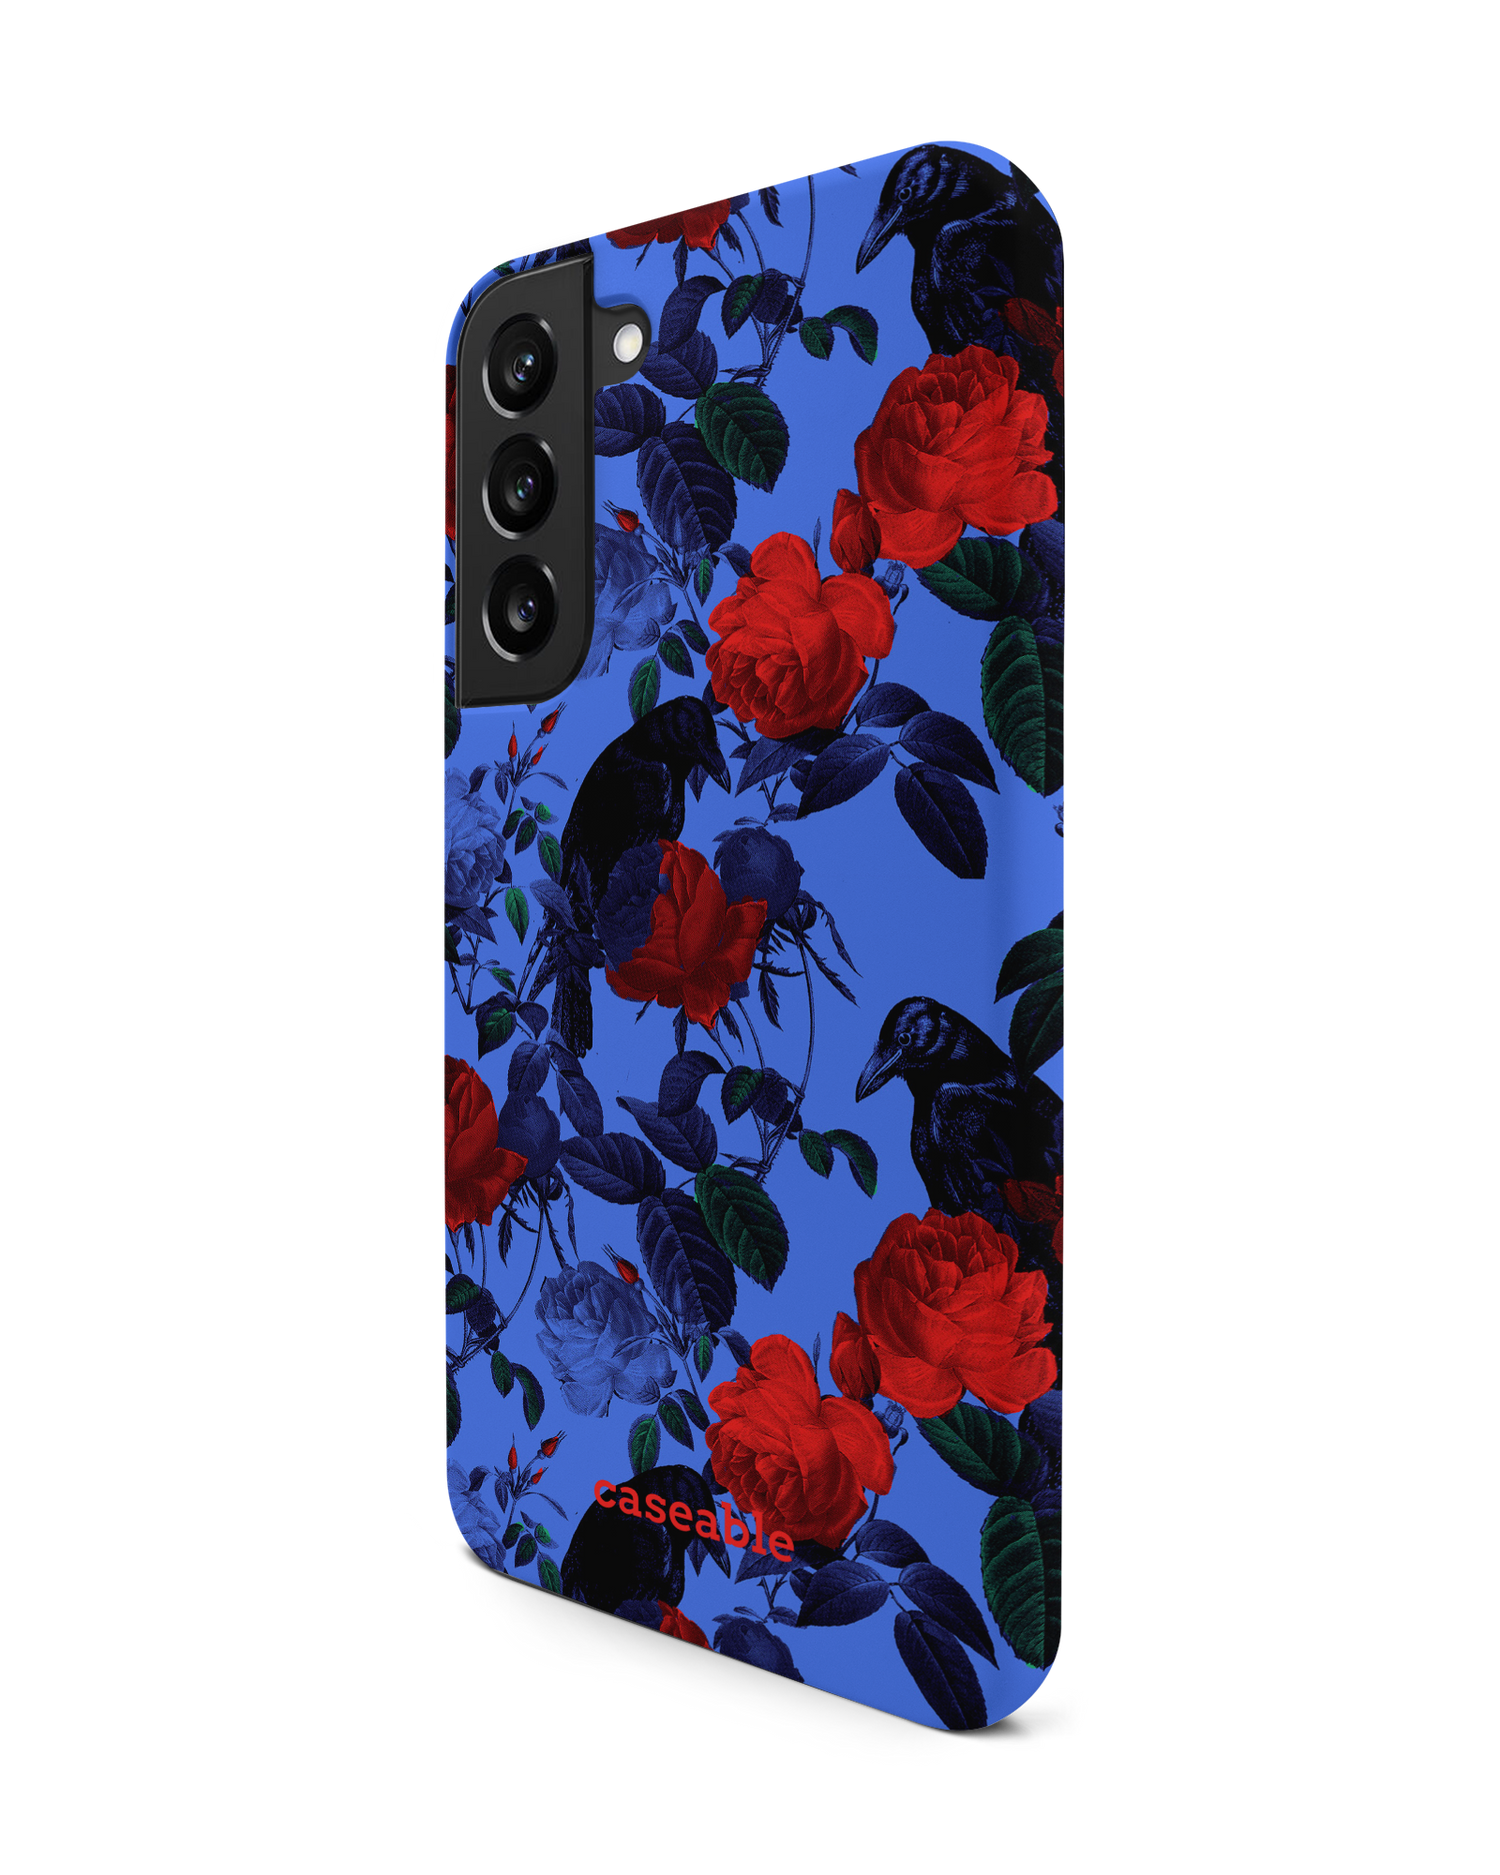 Roses And Ravens Premium Phone Case Samsung Galaxy S22 Plus 5G: View from the right side